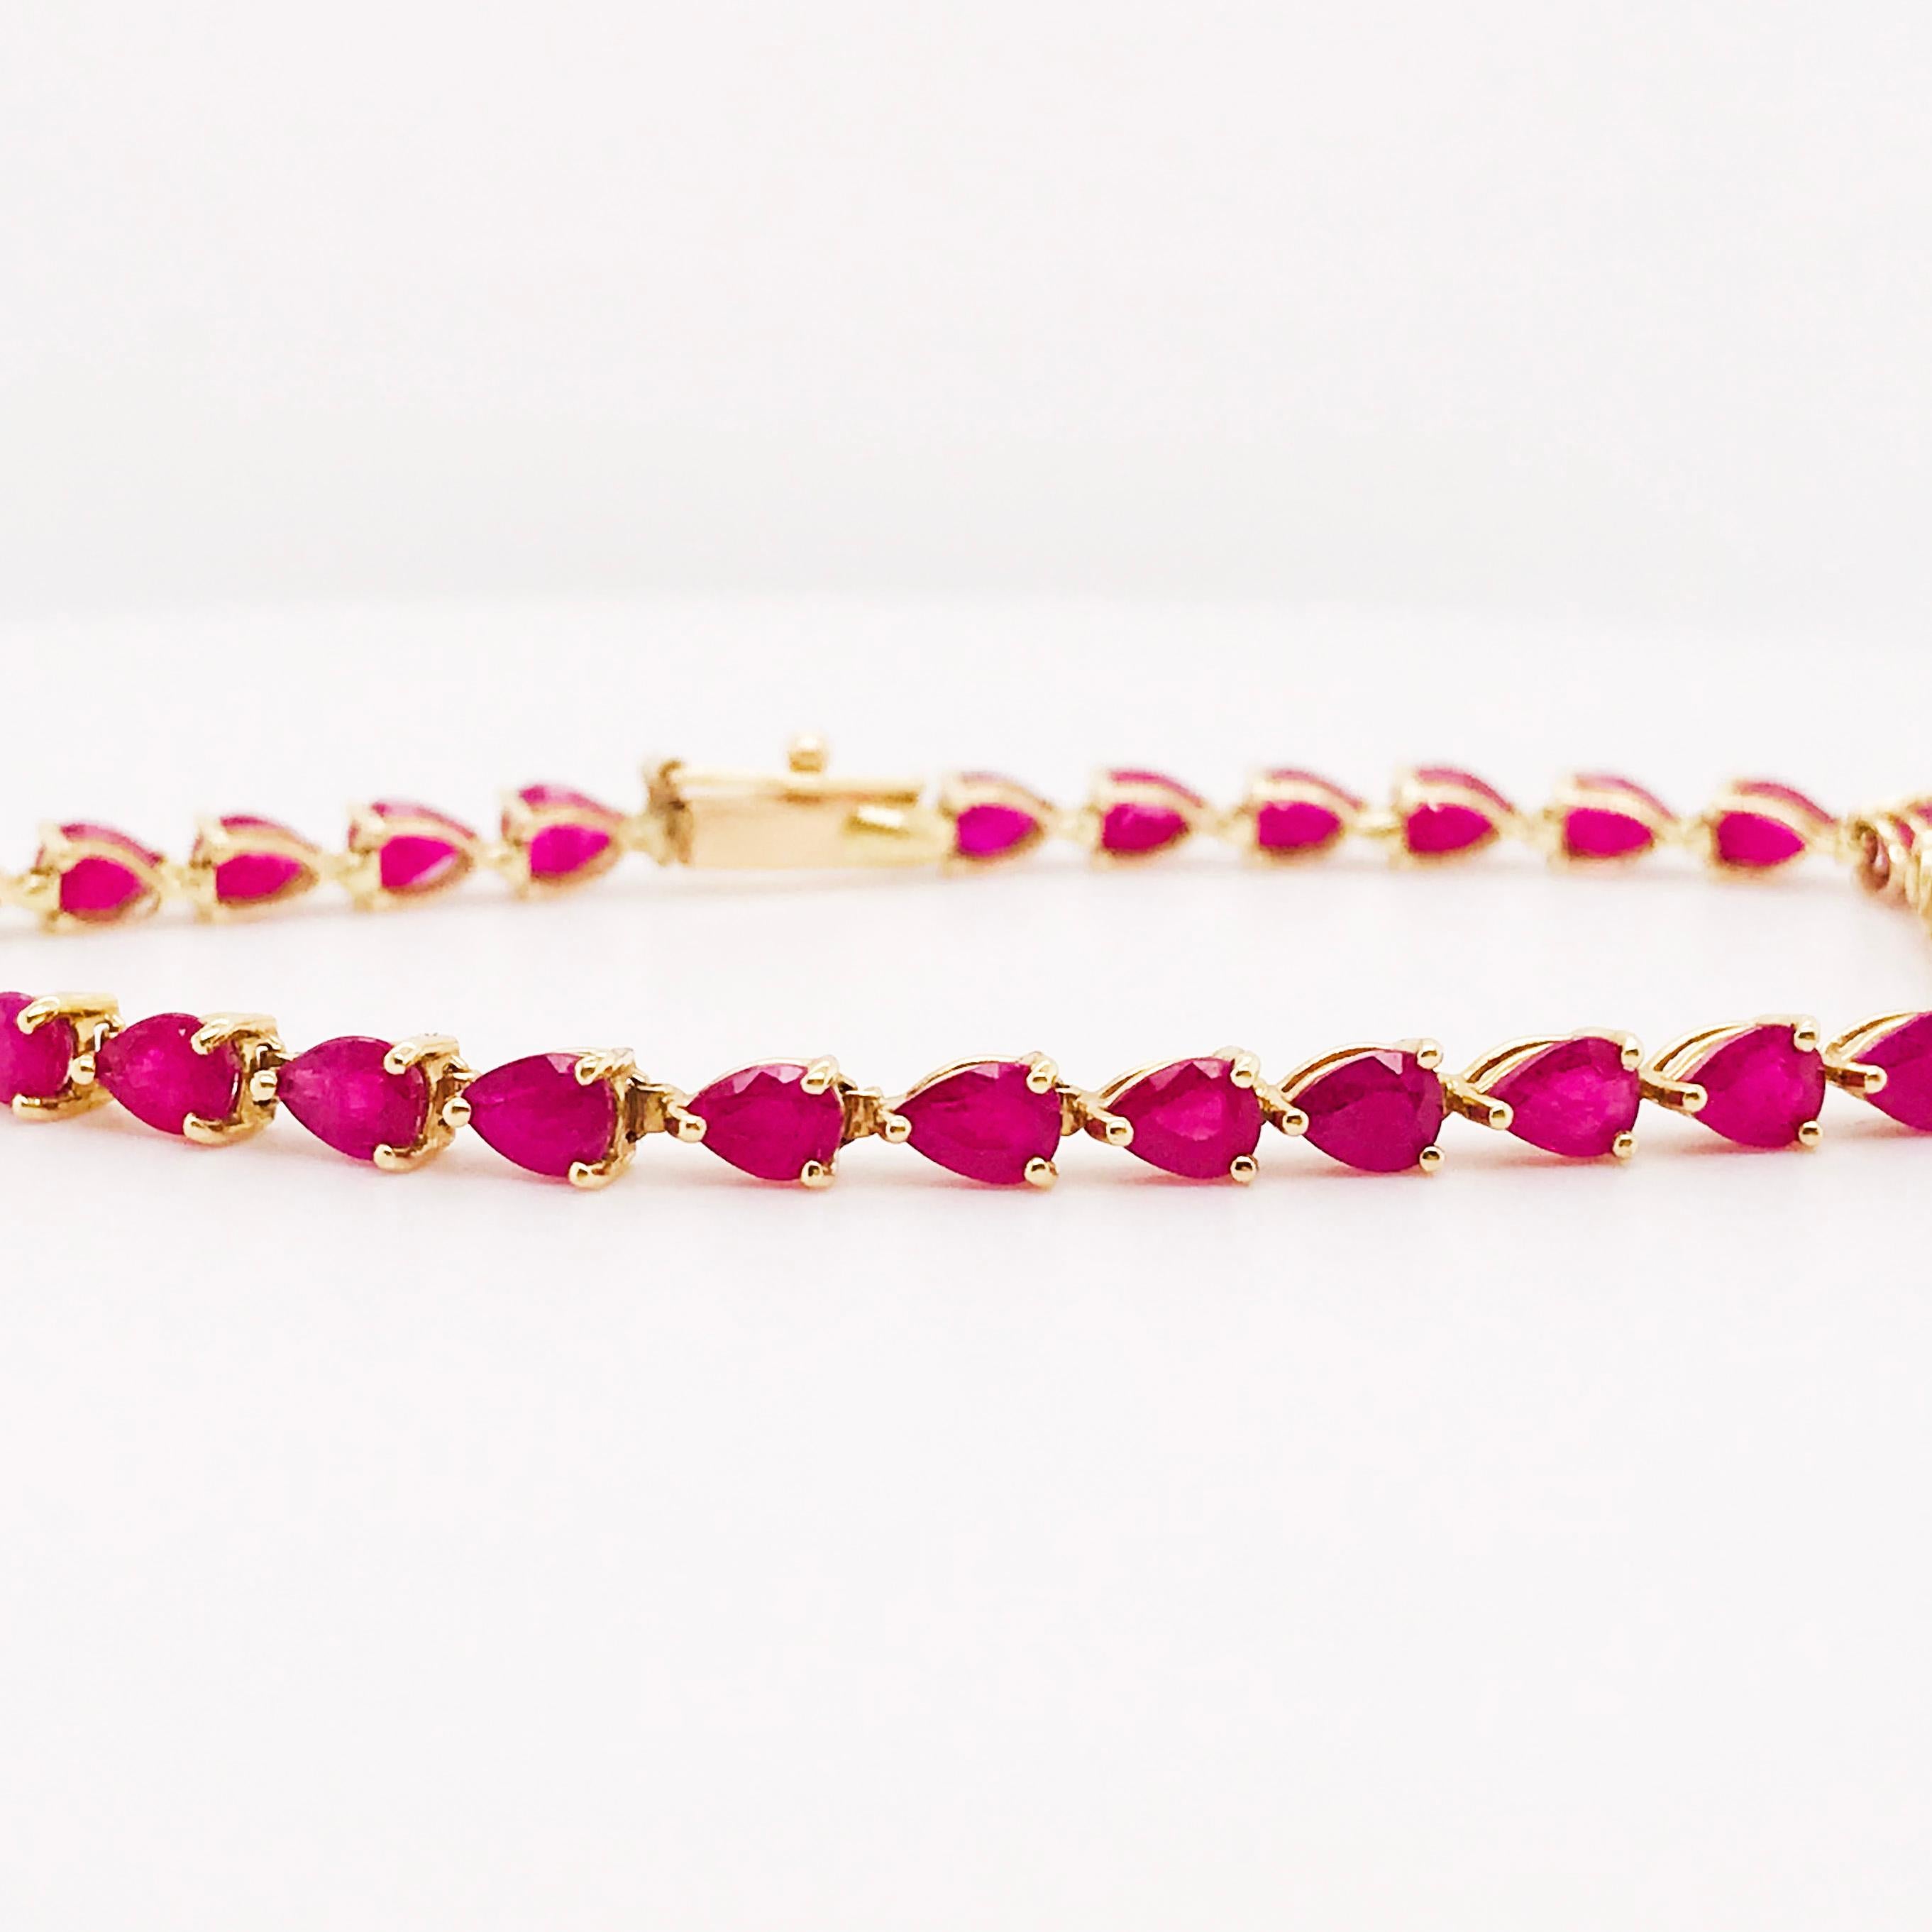 This unique ruby tennis bracelet is romantic and timeless. With genuine pear shaped ruby gemstones this bracelet has the traditional look of a tennis bracelet but one of a kind look with hand-picked ruby gemstones. This would make a great addition